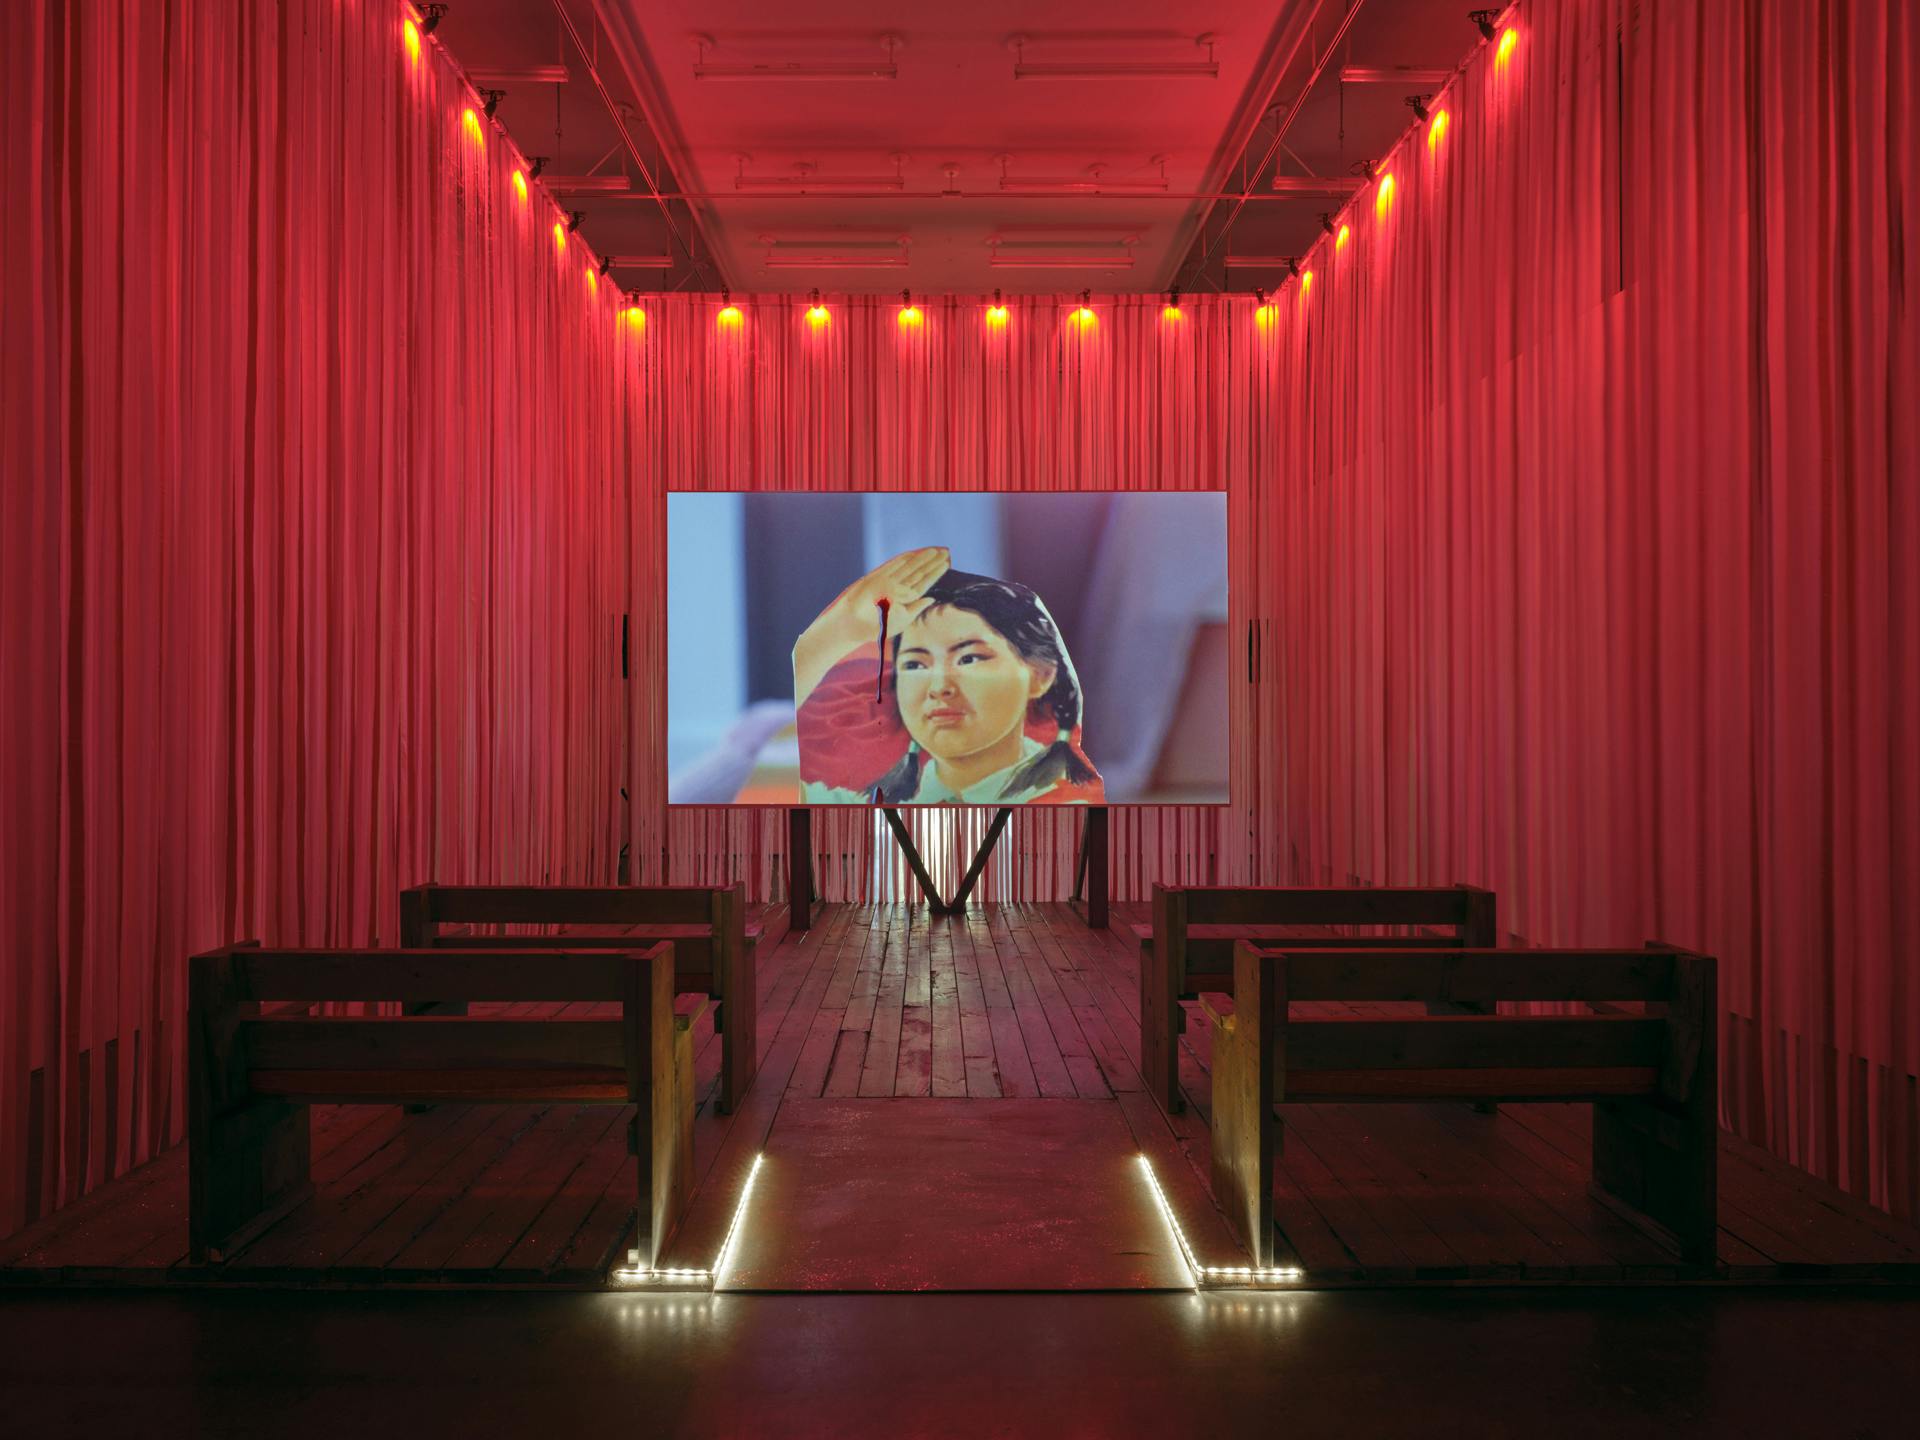 Two rows of benches face a screen in a room with pink and red ribbons walls. Onscreen, red liquid drips down the palm of a paper cut-out propaganda-style image of a young girl saluting. 